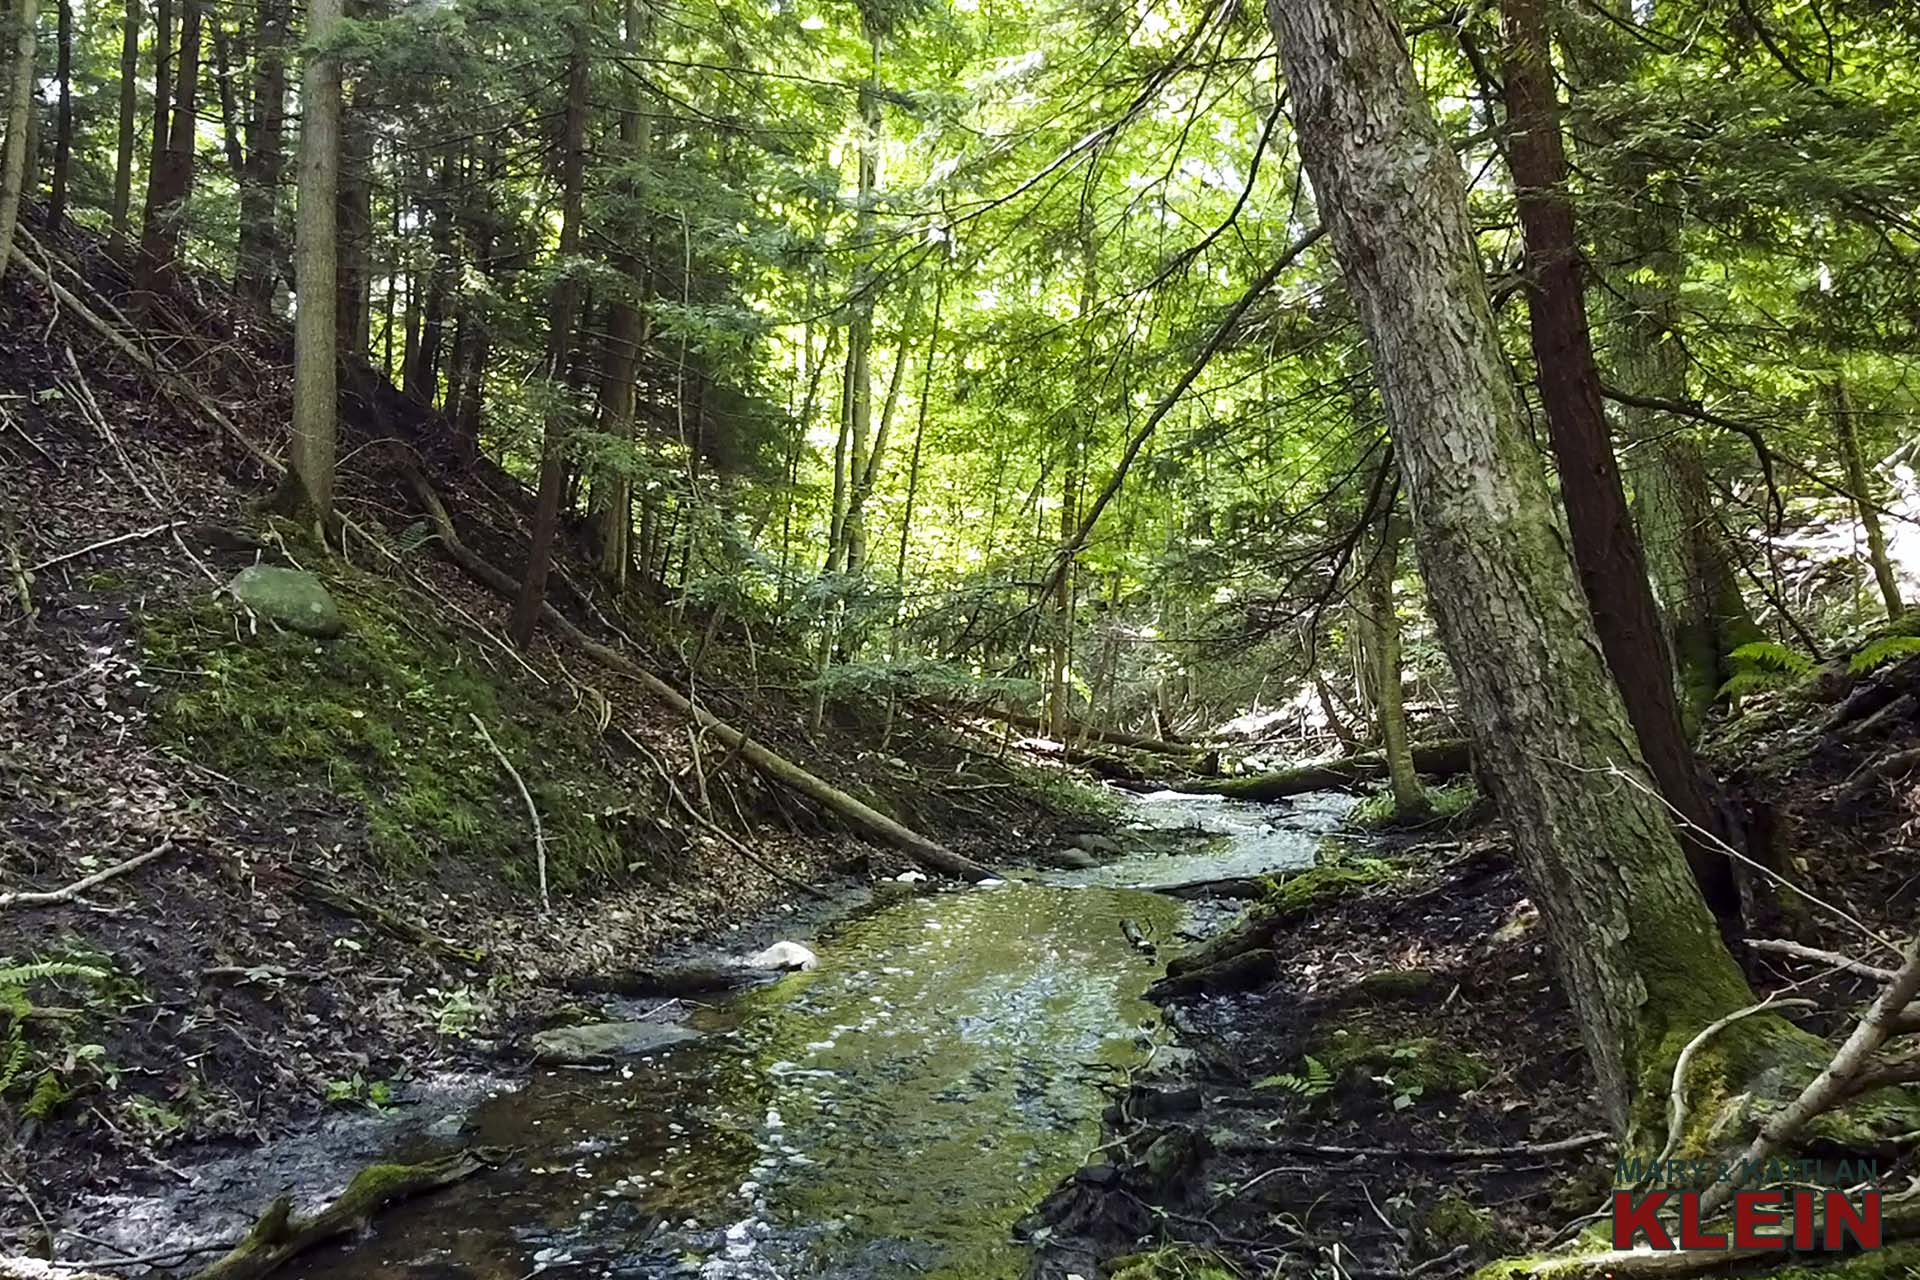 Stream, Tributary to the Pine River